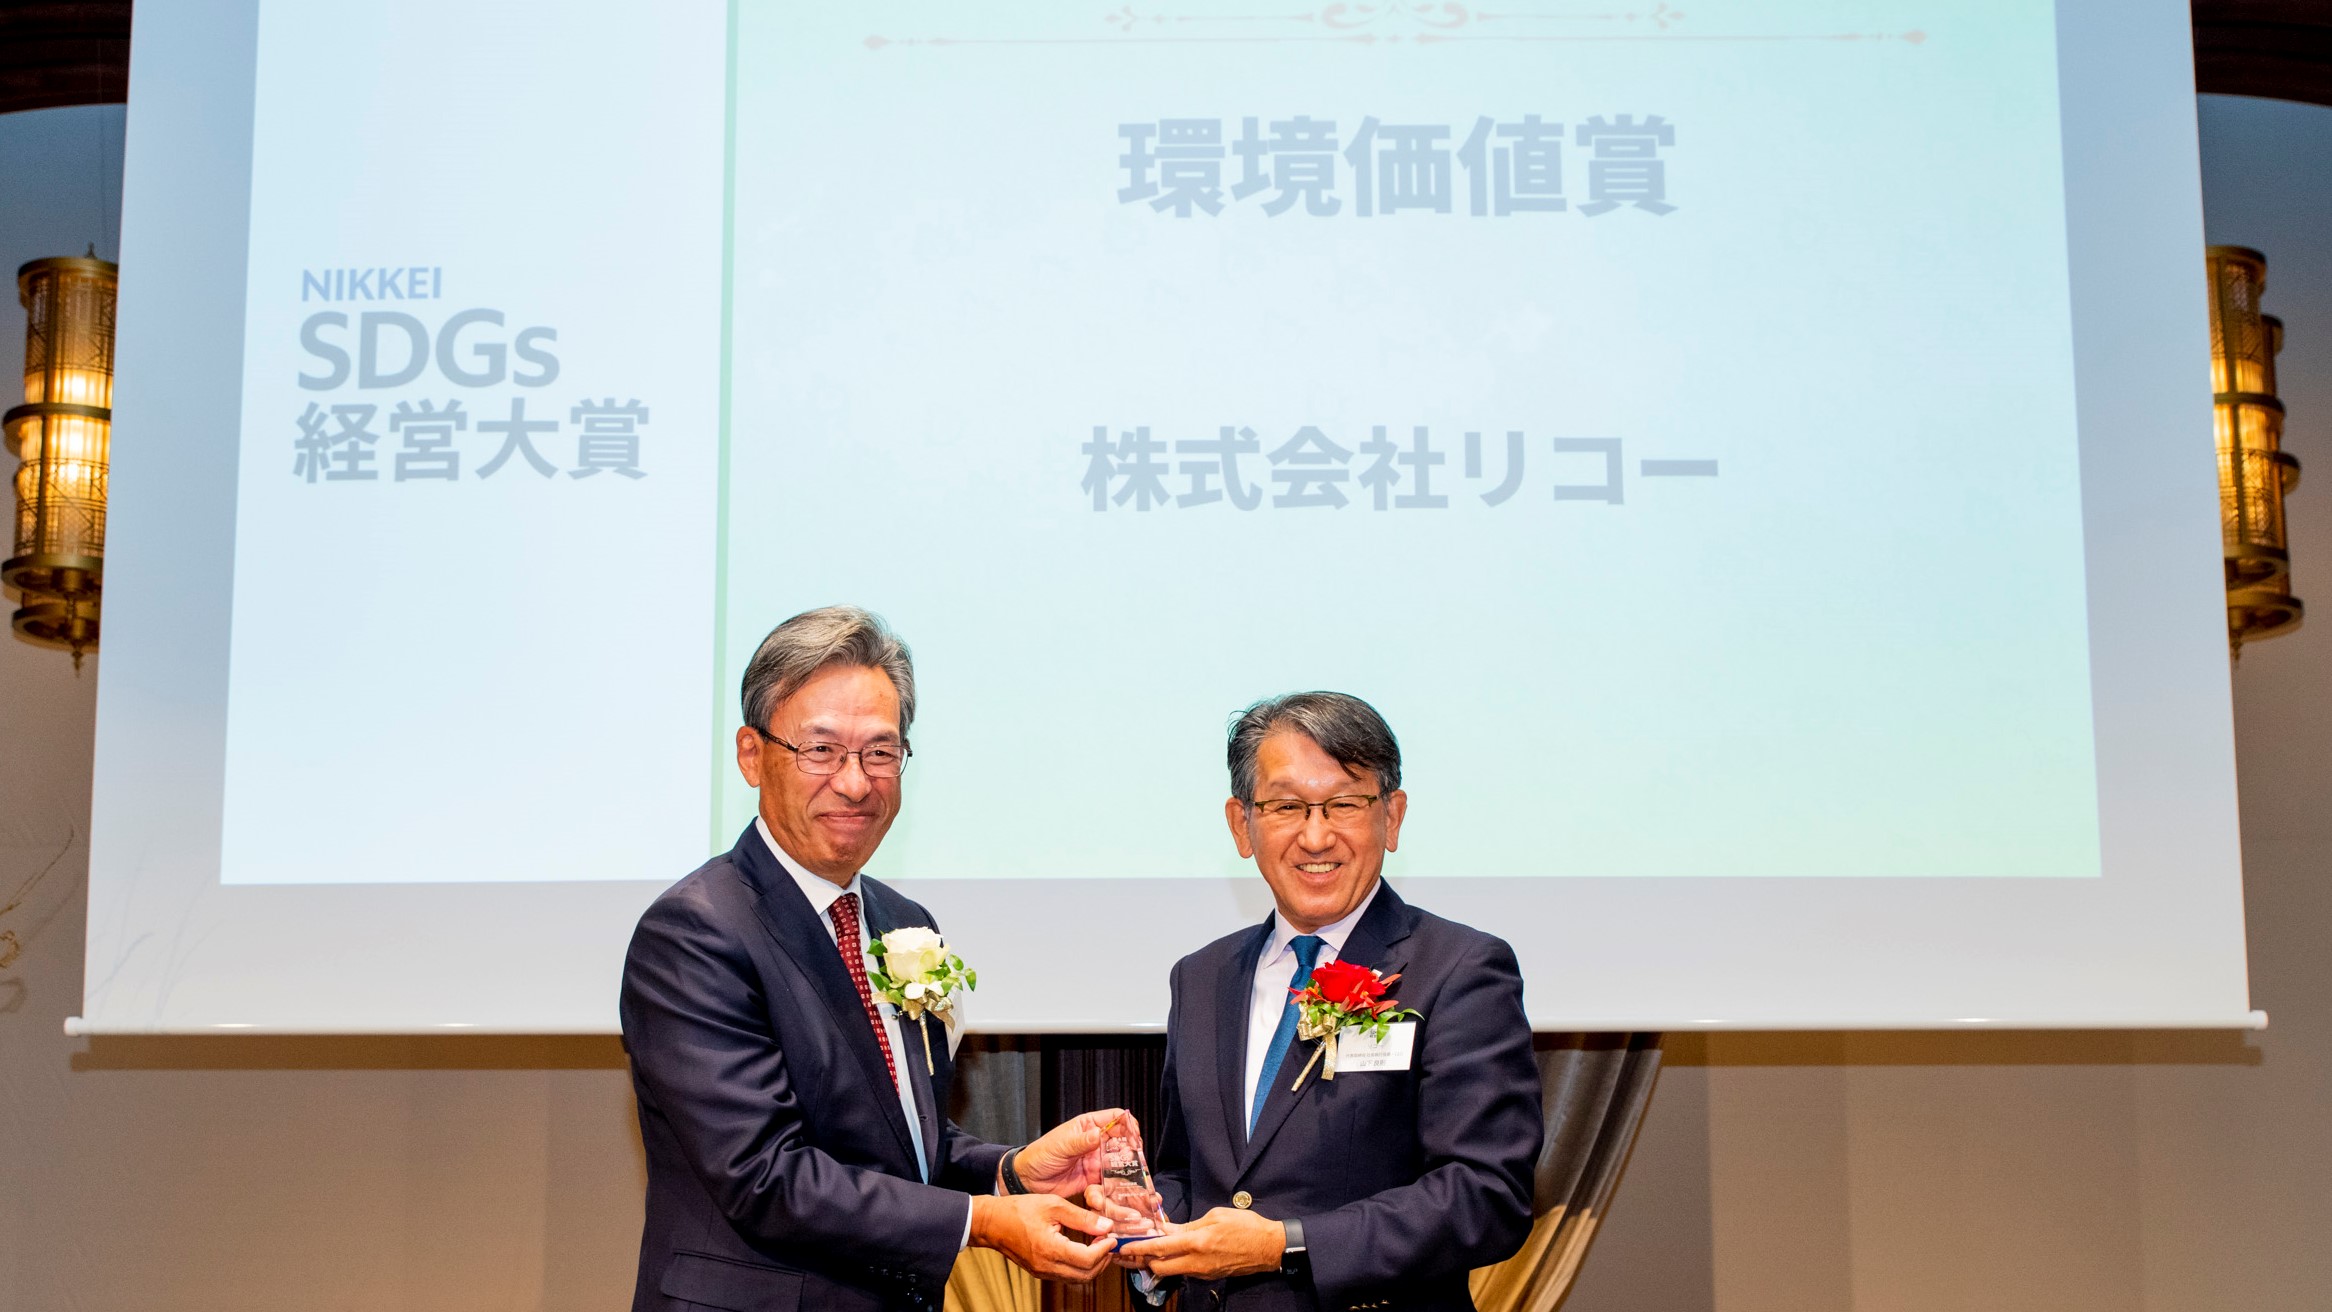 Ricoh wins its 2nd Environmental Value Award at the 4th Nikkei SDGs Management Grand Prix